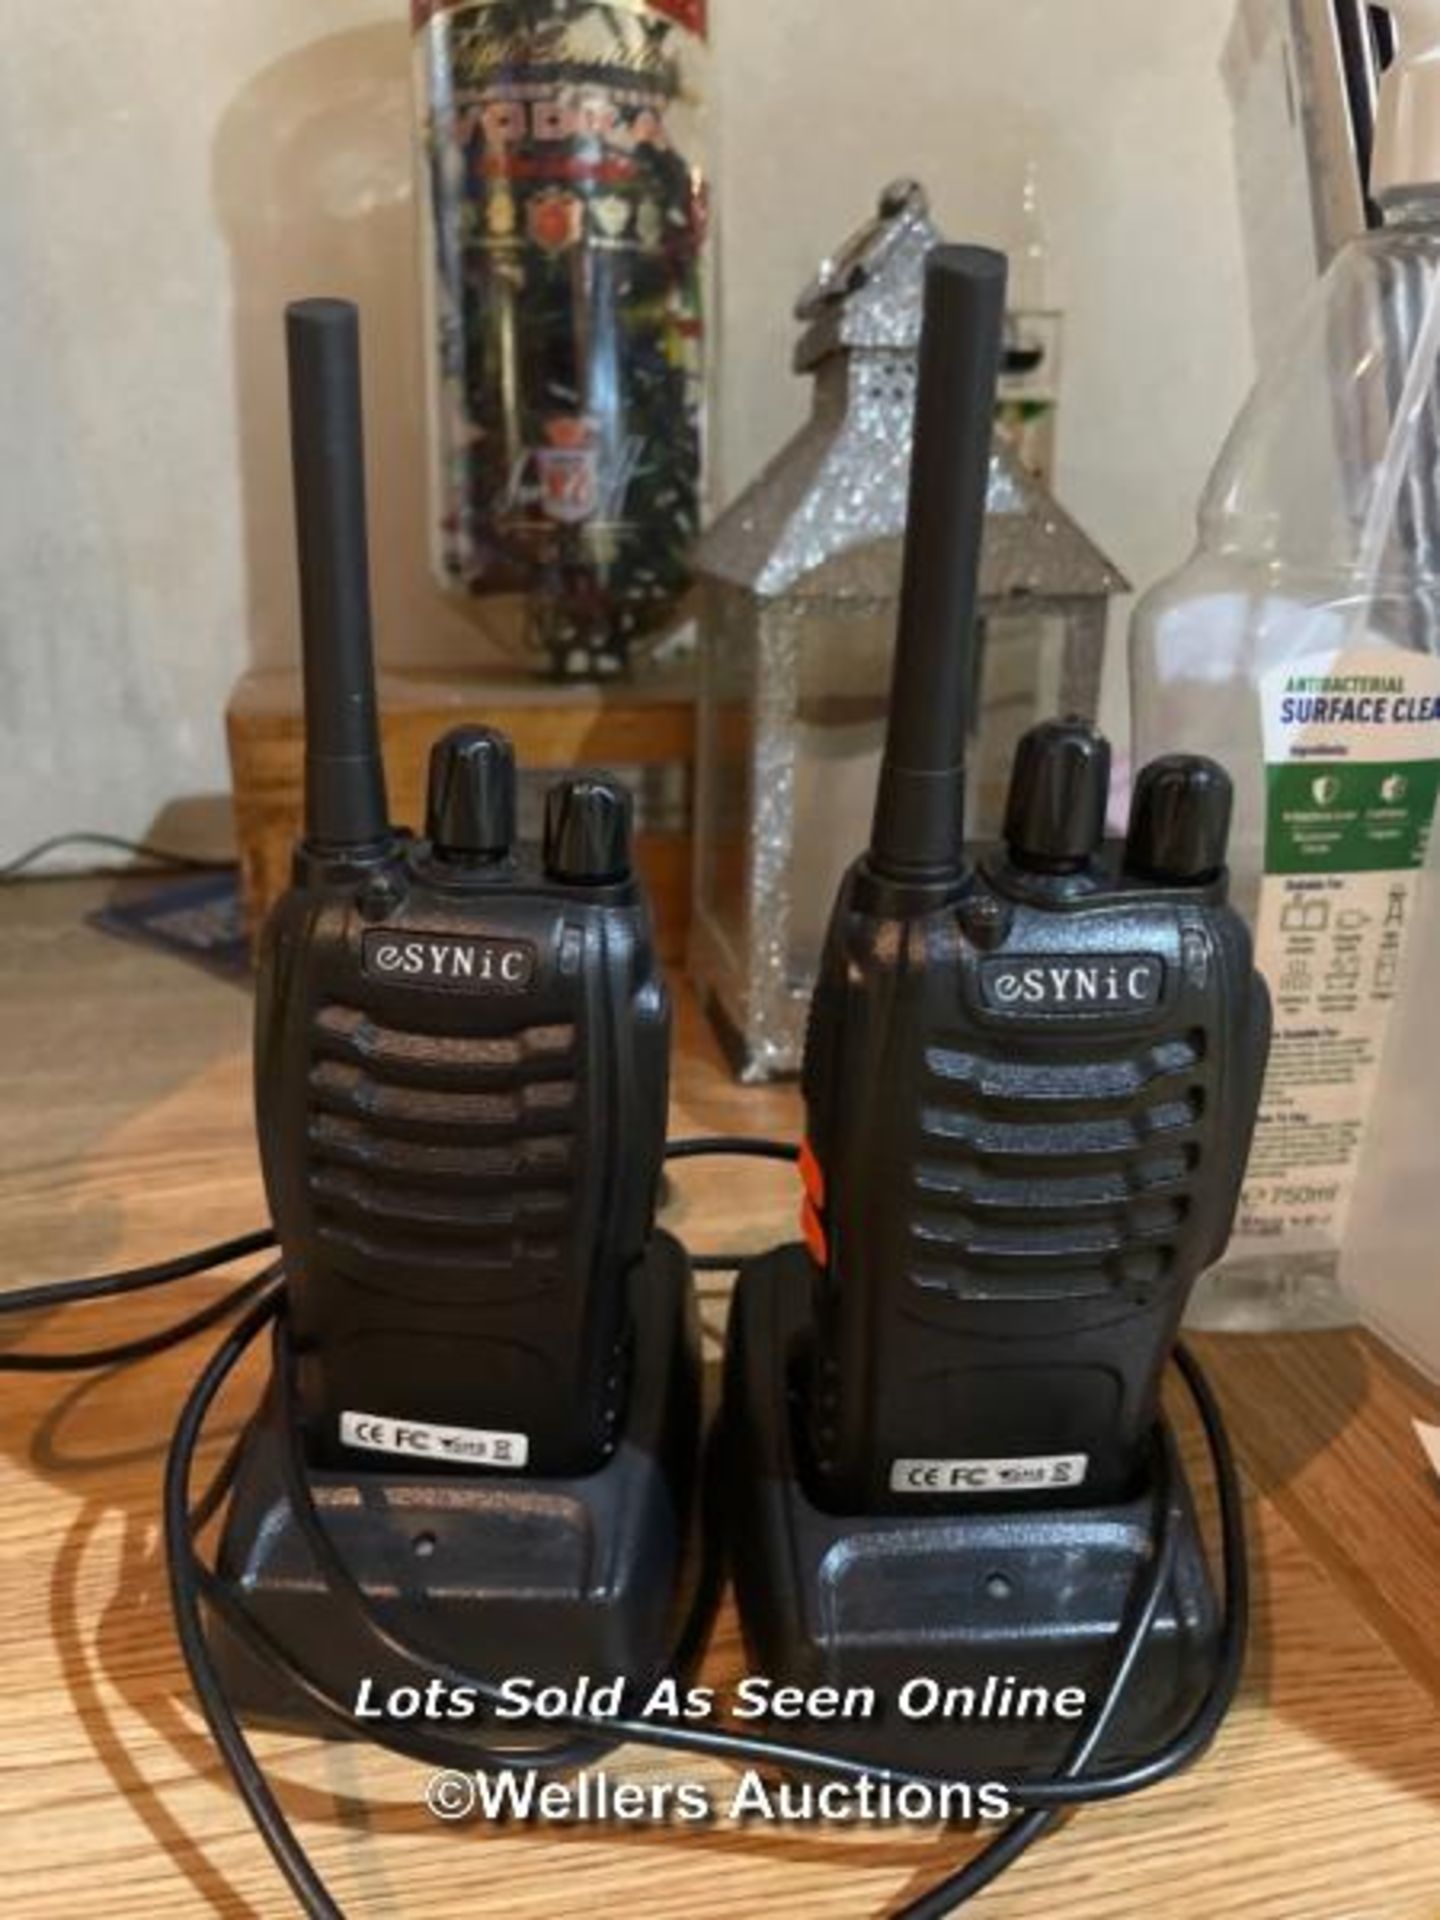 PAIR OF SYNIC WALKIE TALKIES, WITH CHARGING DOCKS AND USB LEADS / COLLECTION LOCATION: OLD WOKING